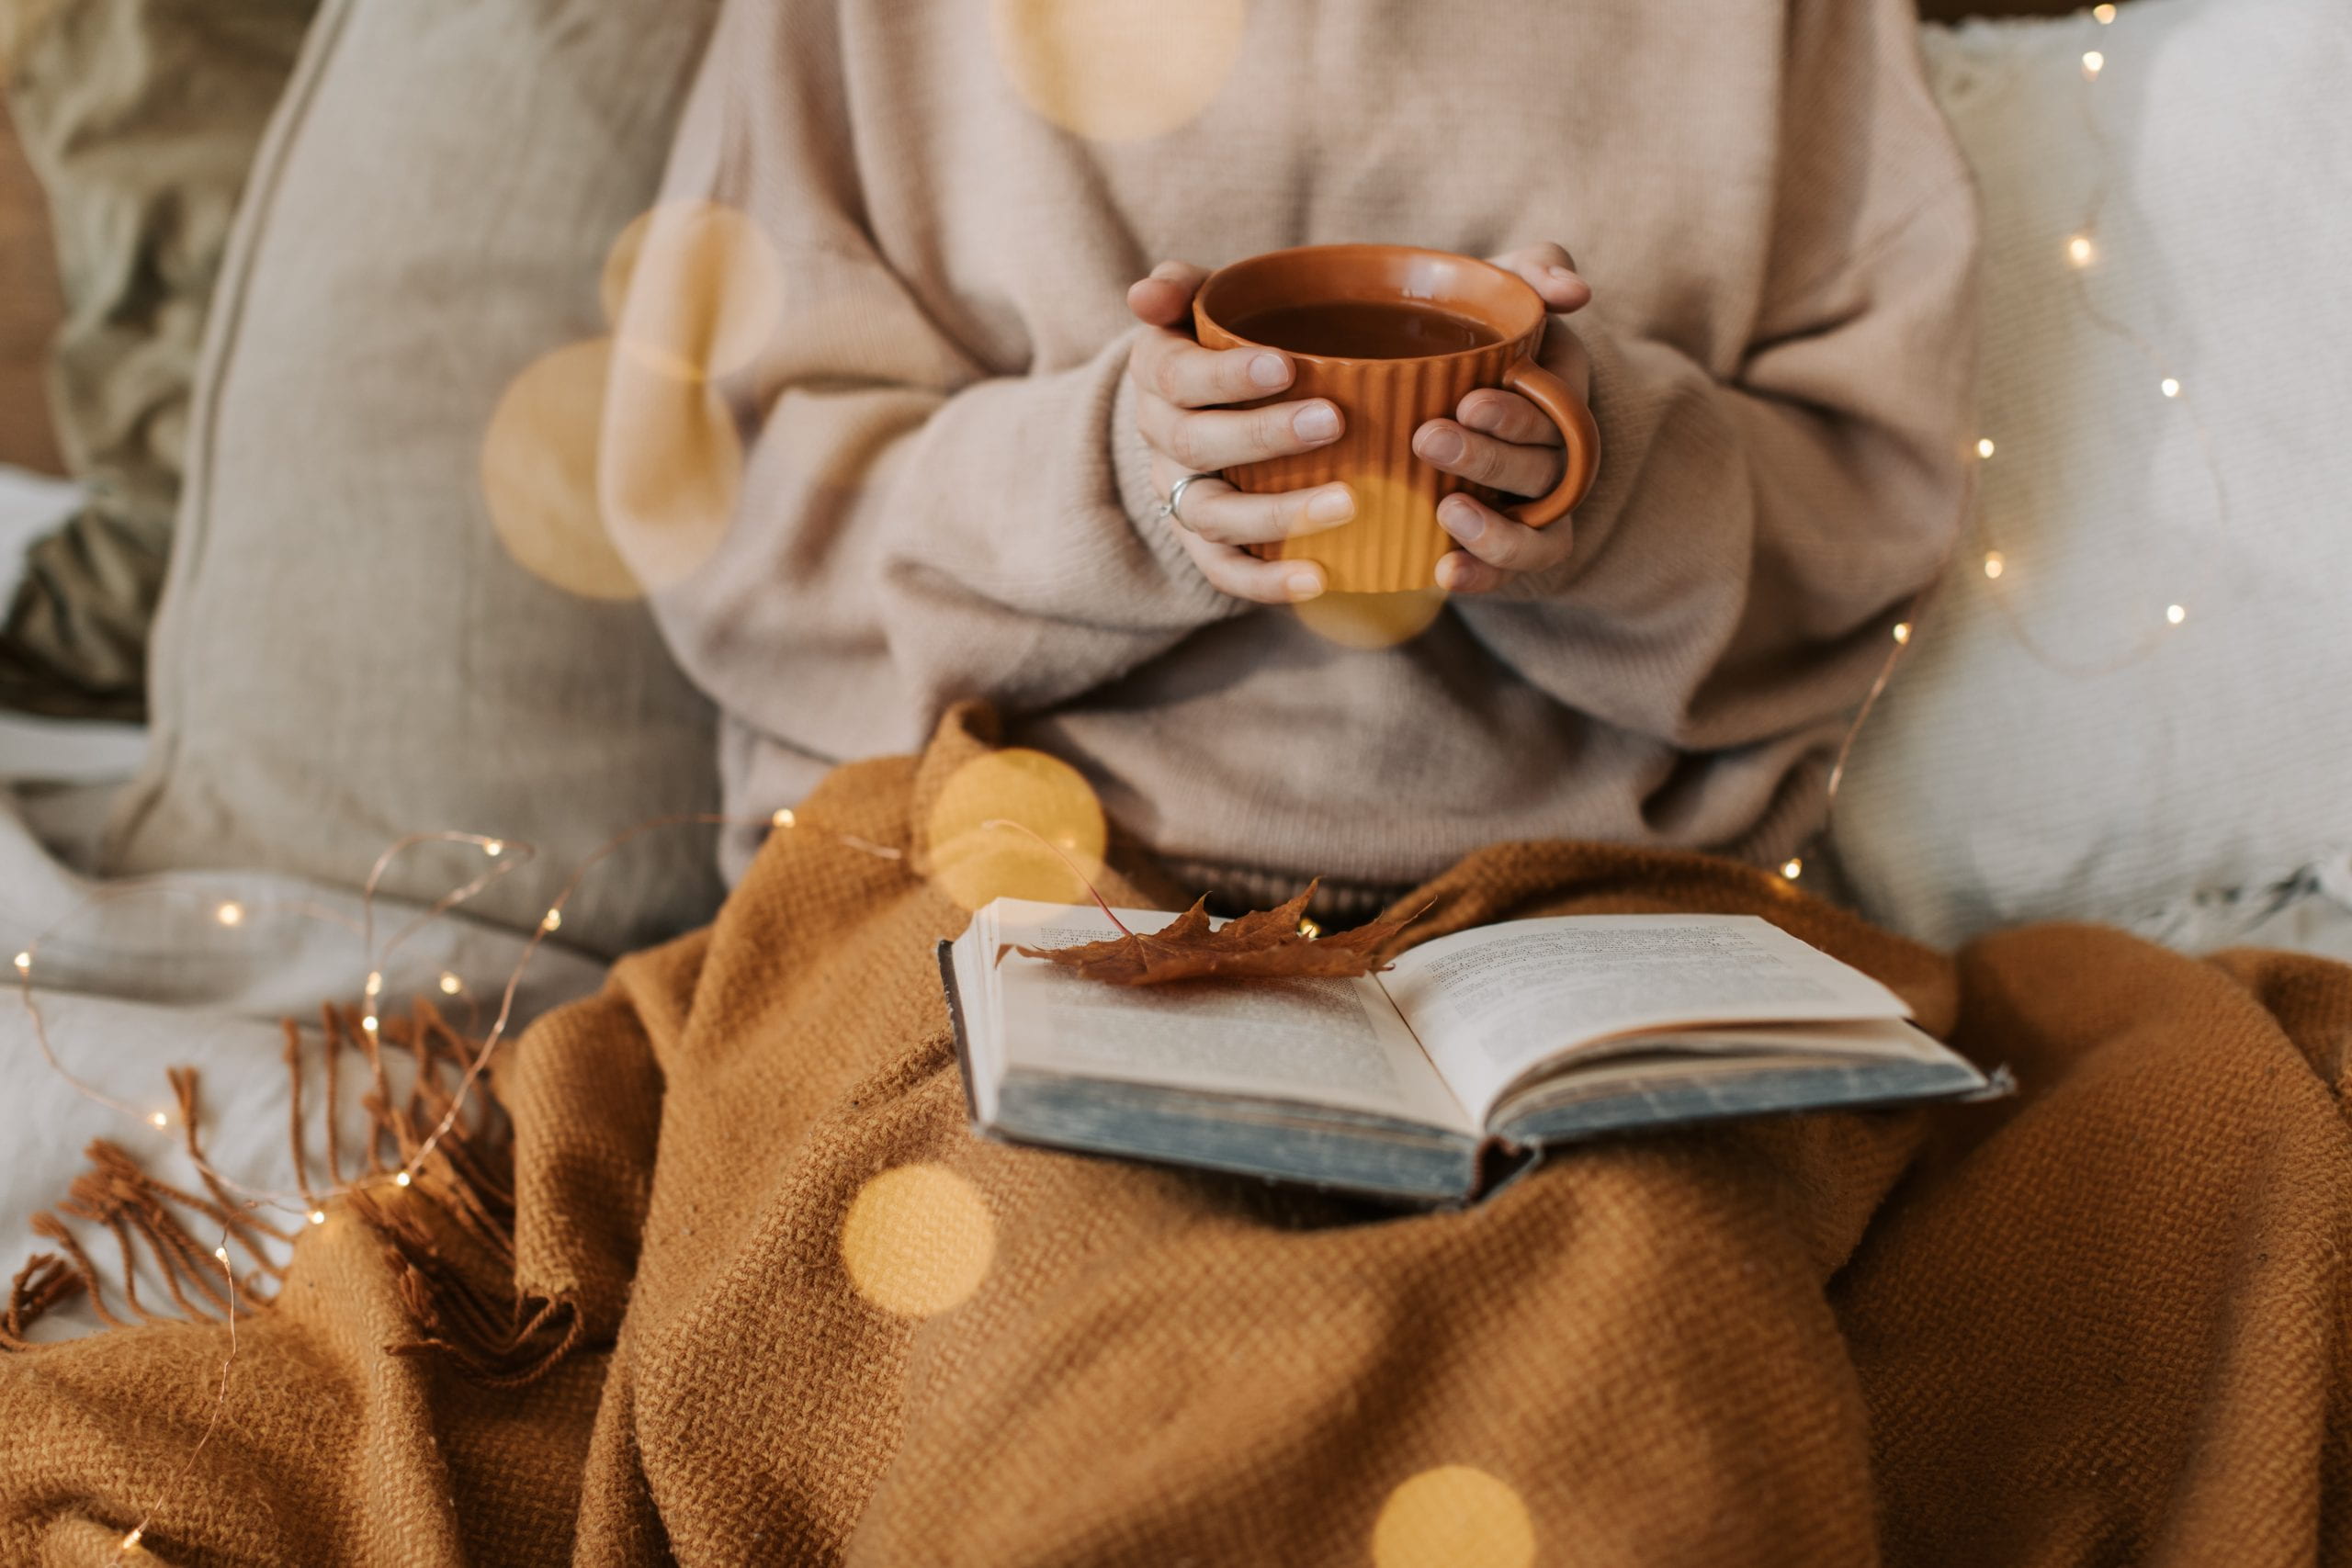 woman with a cup of tea and a book in a blanket